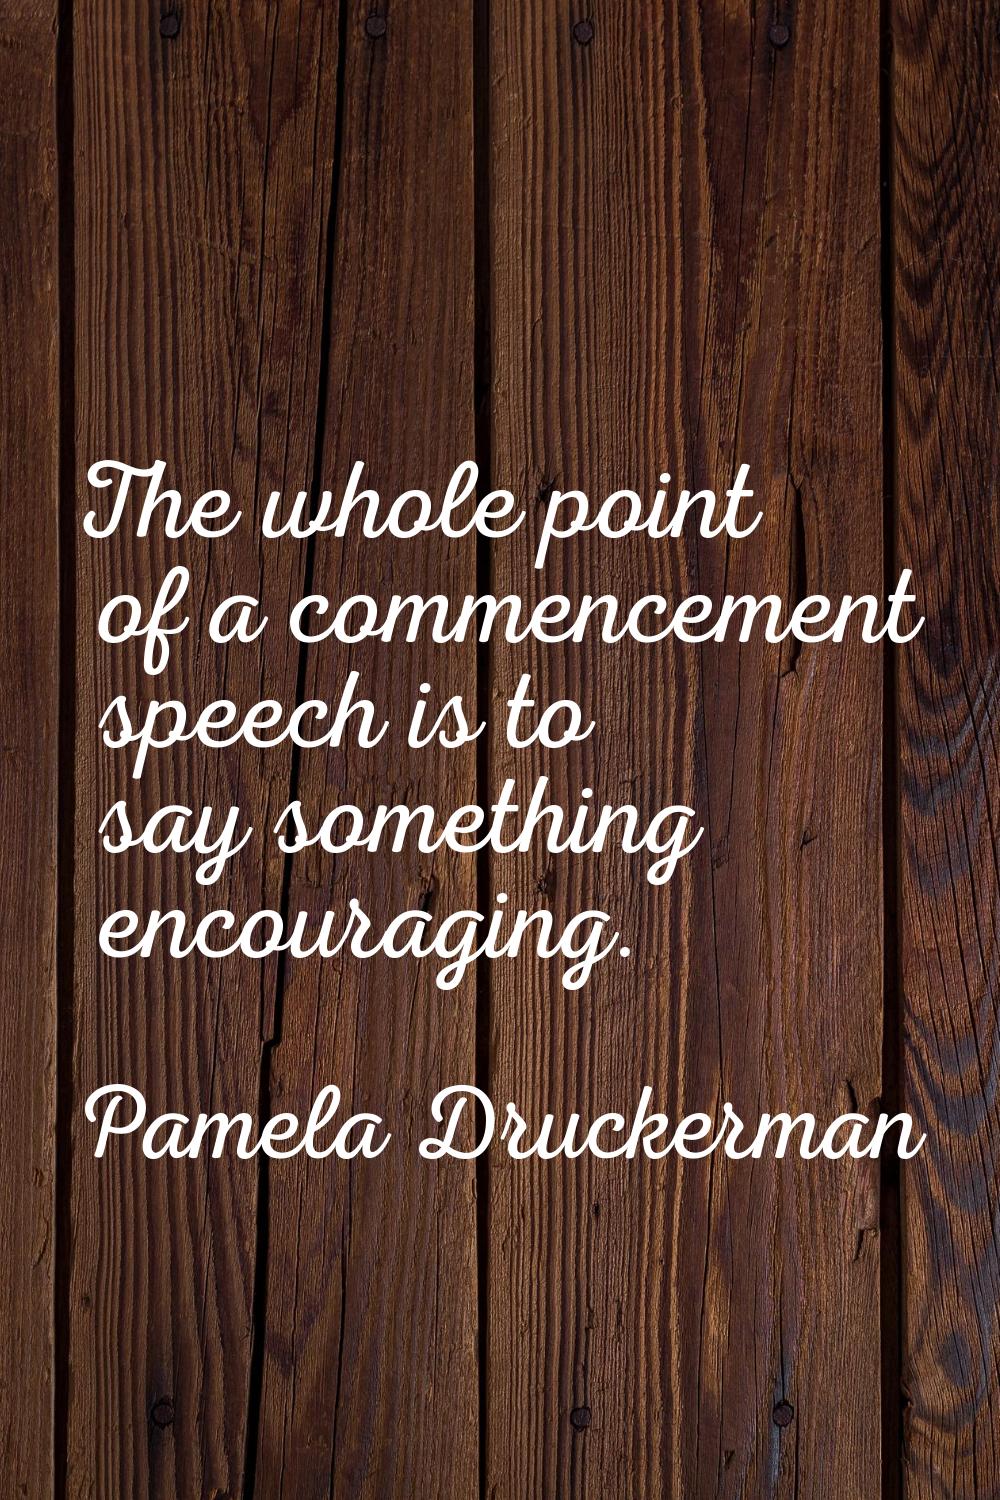 The whole point of a commencement speech is to say something encouraging.